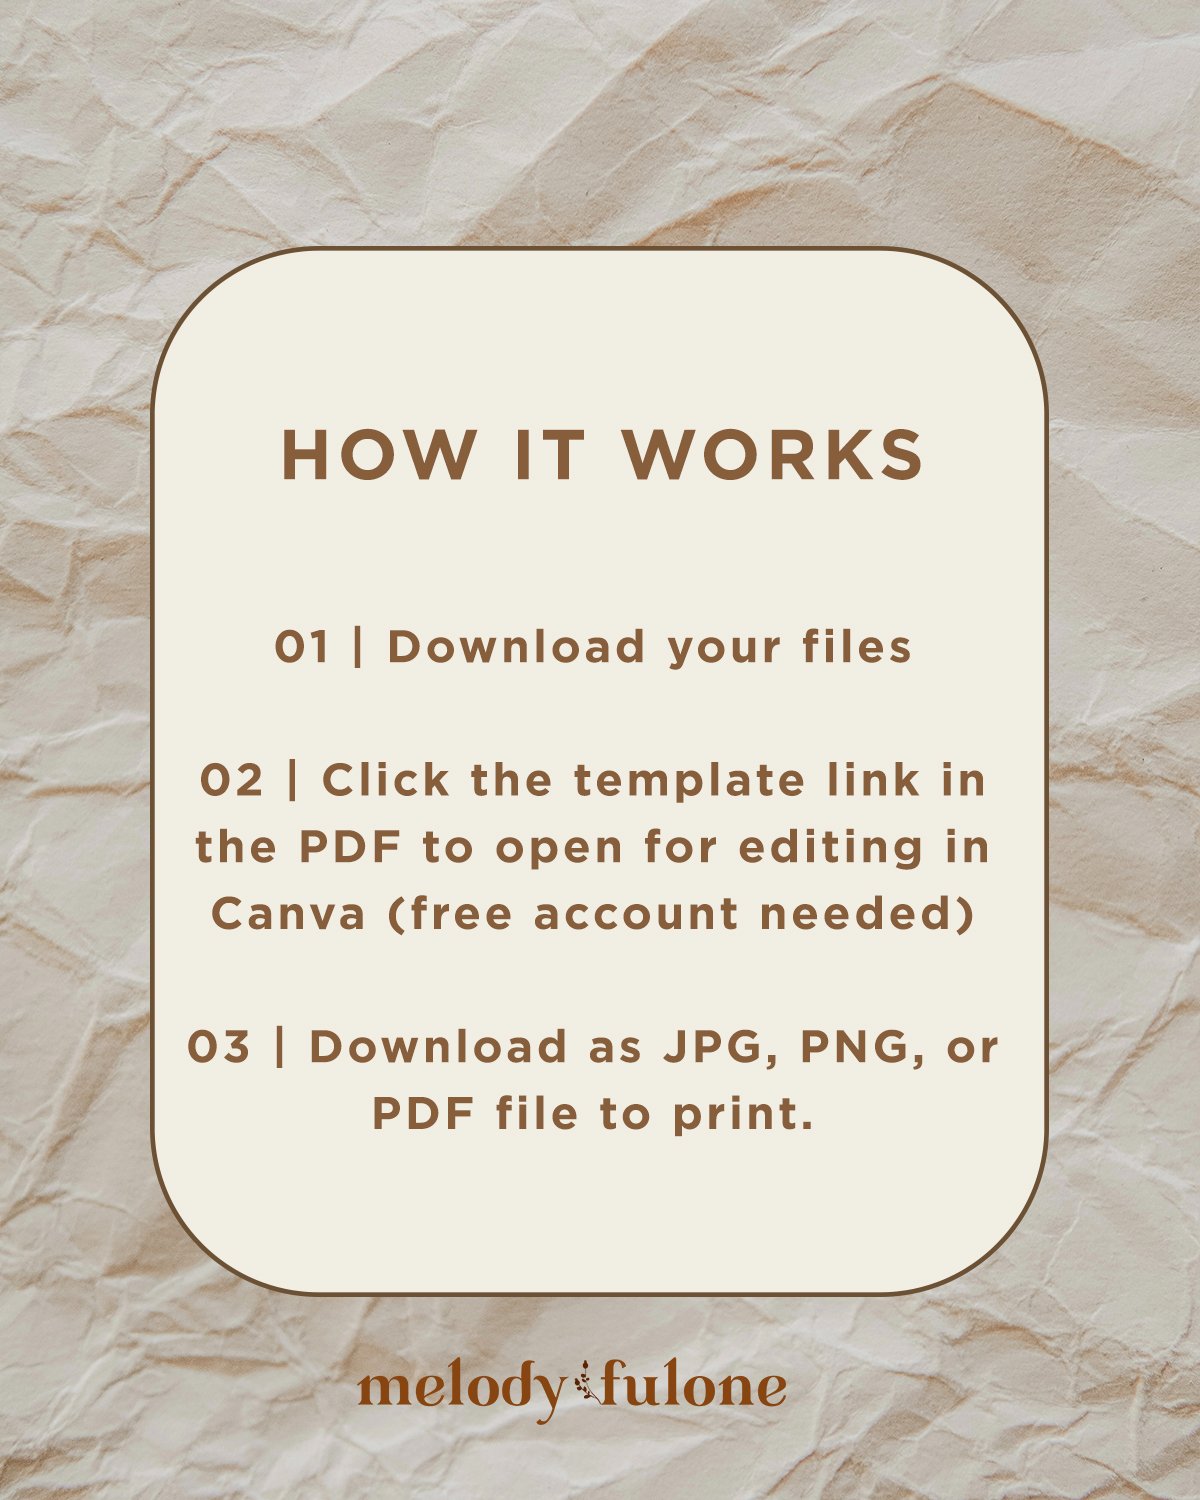 How To Print Small Business Thank You Cards At Home, Canva Printer  Template